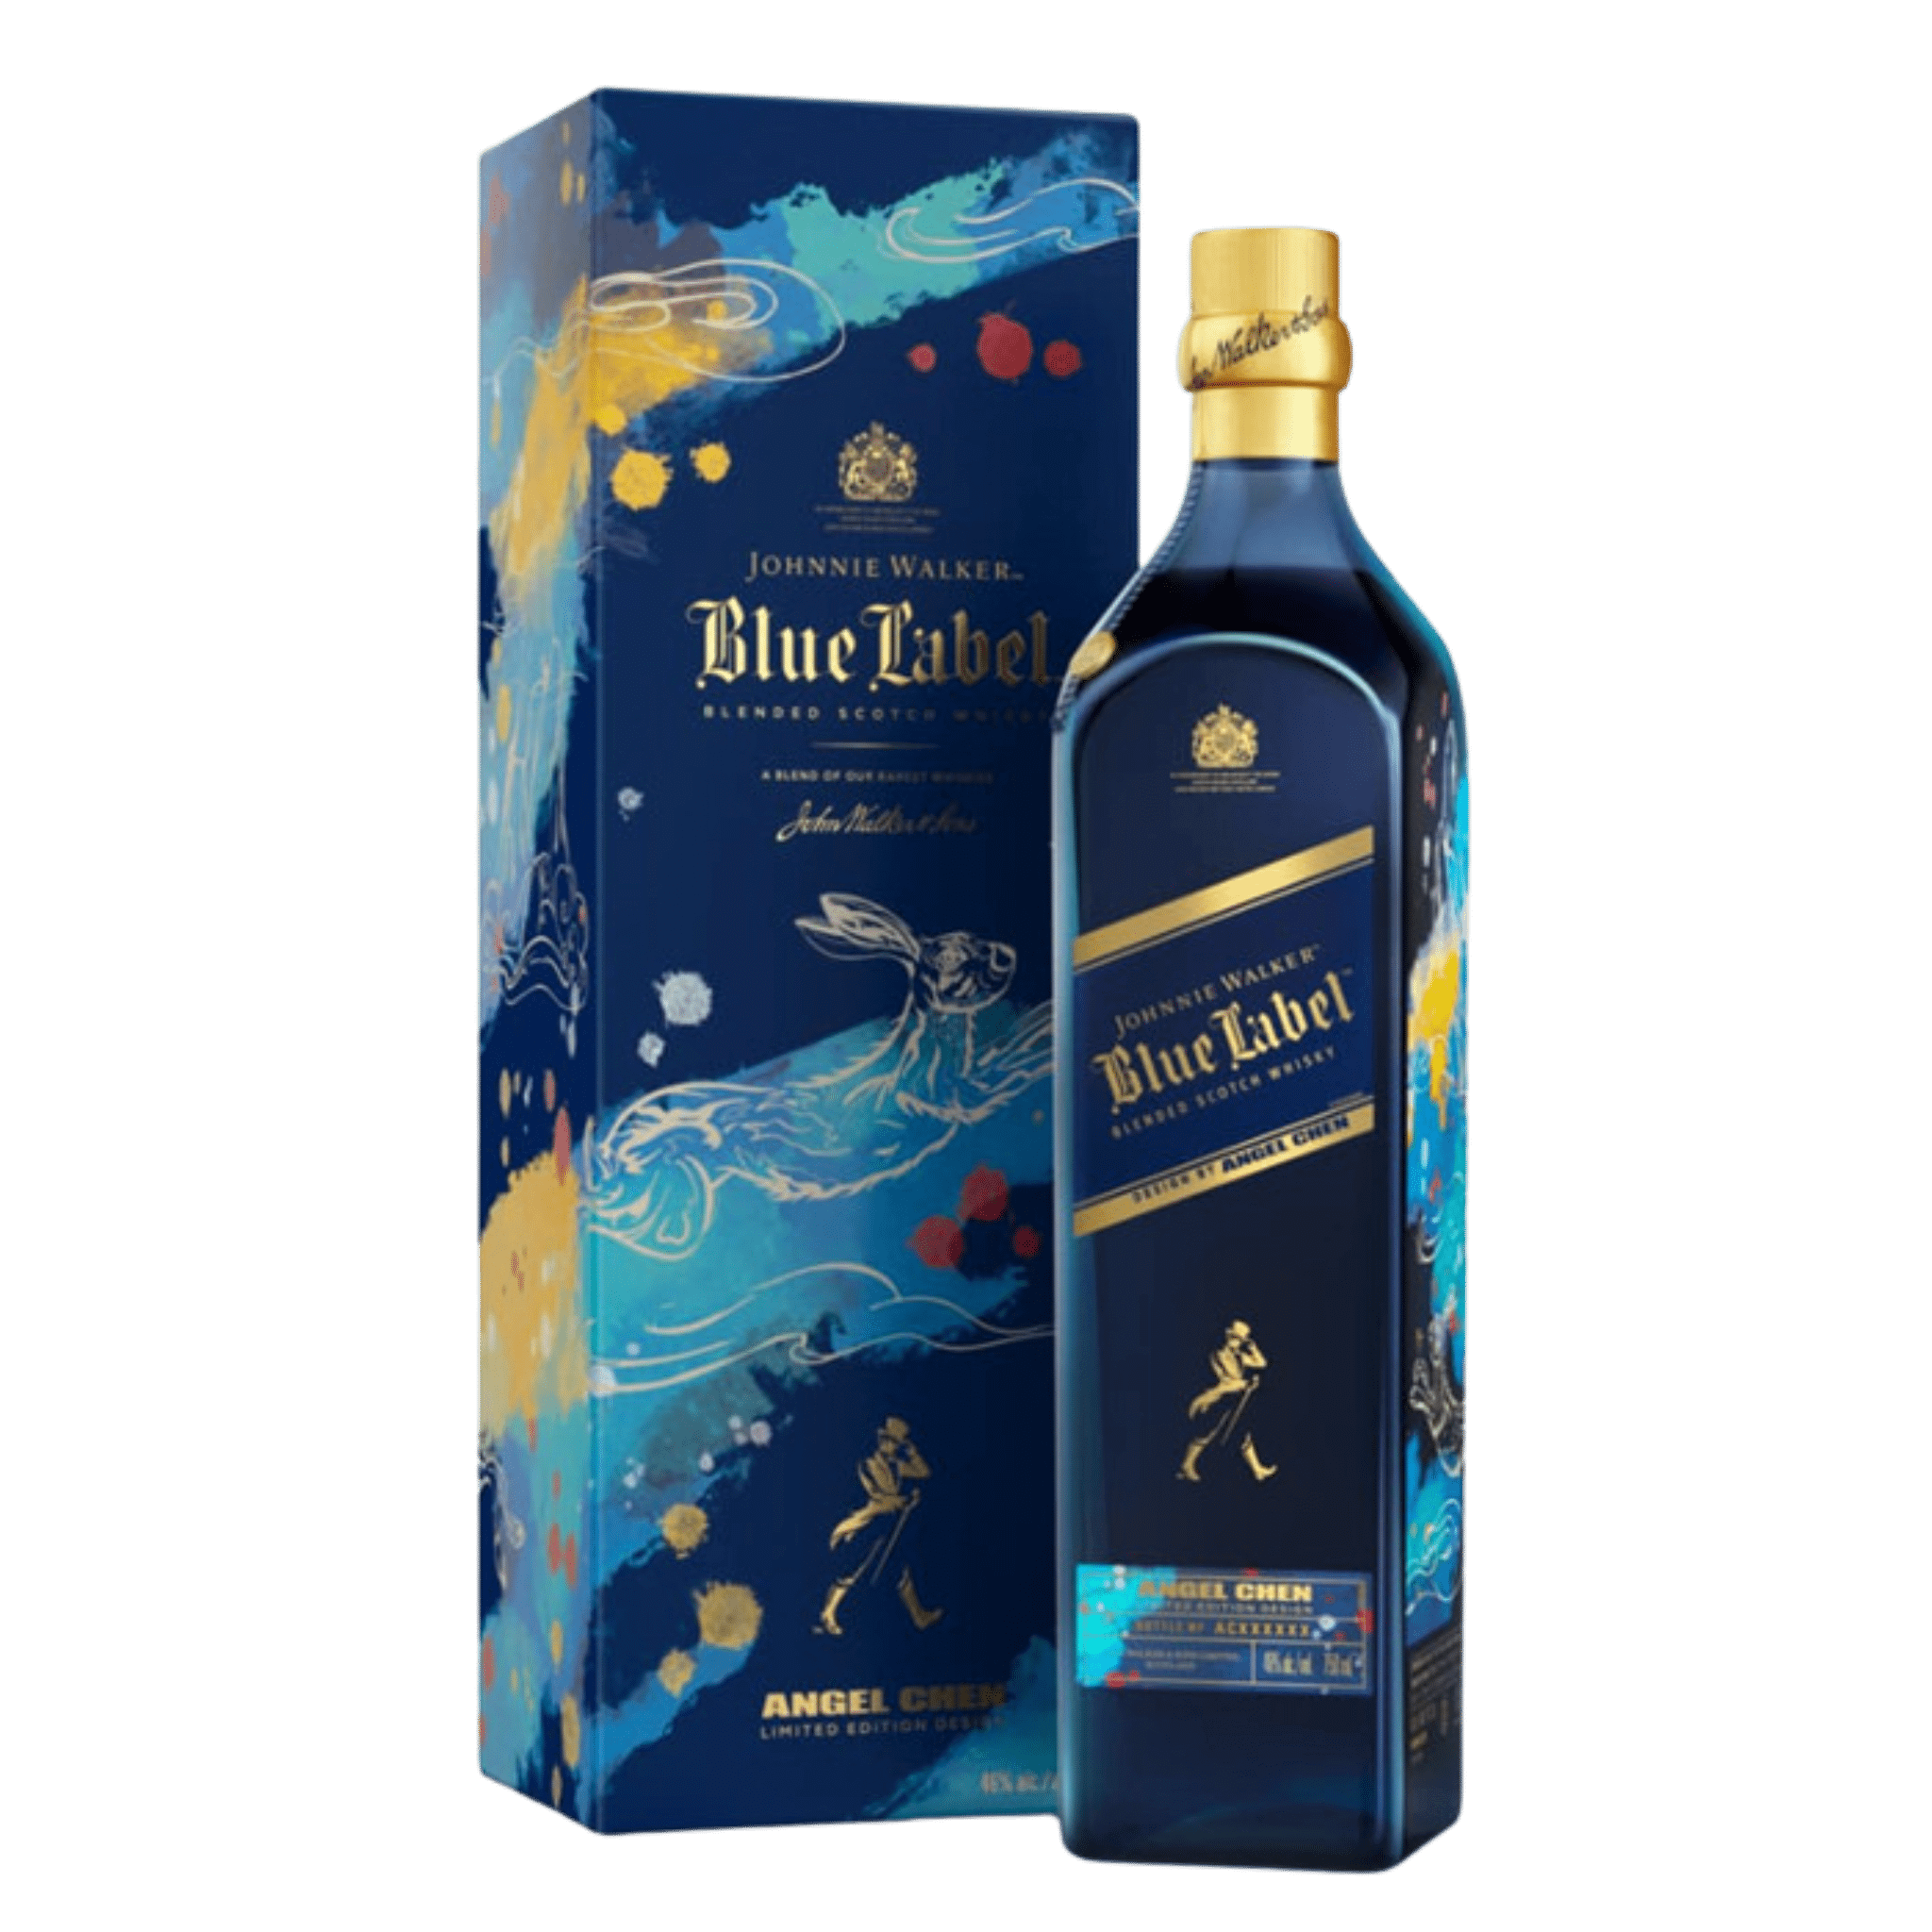 Johnnie Walker Blue Label 750ml Year of the Rabbit Edition at ₱21399.00